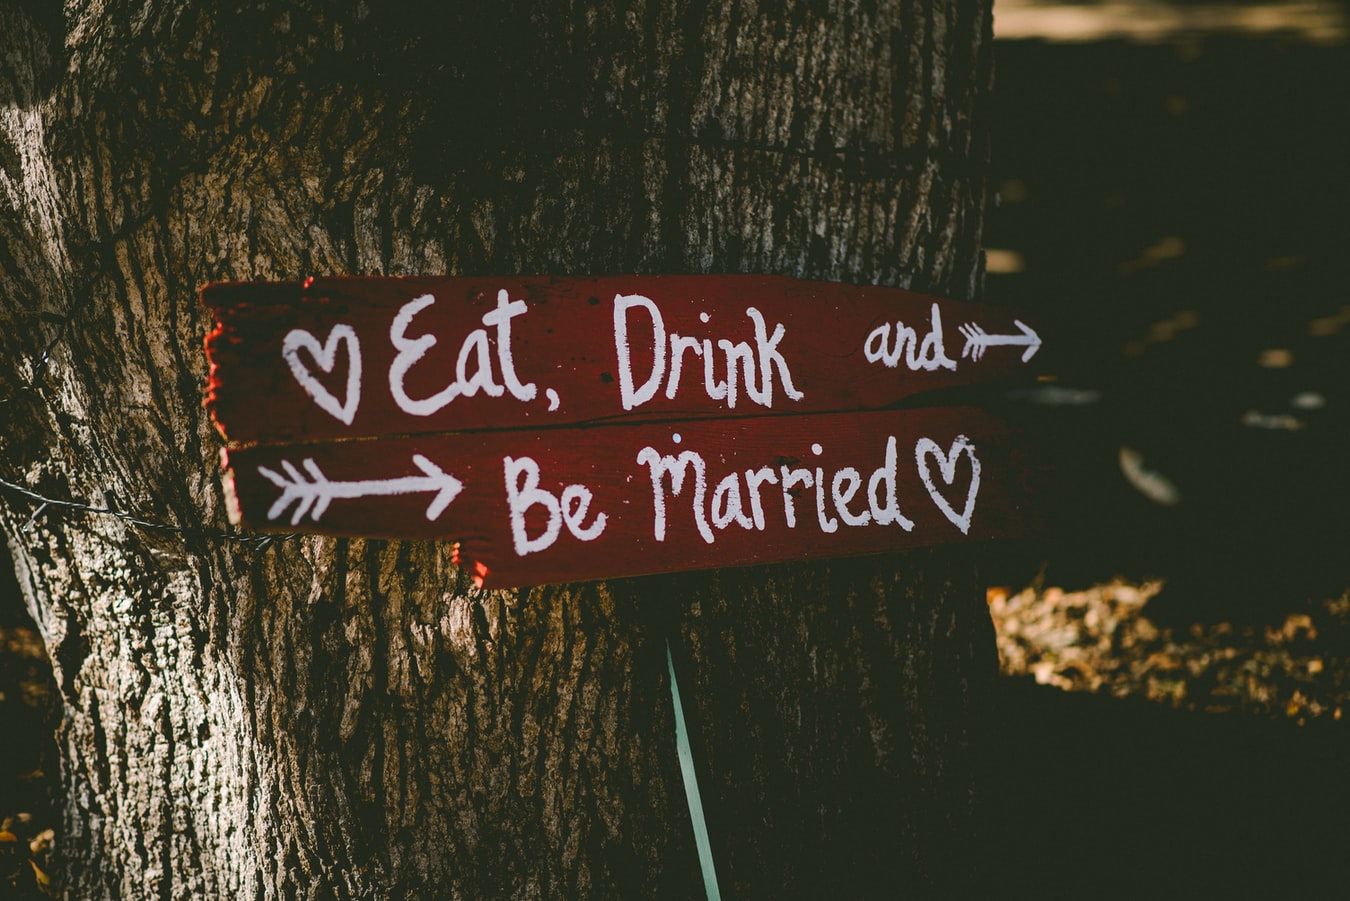 foto archivo - cartel "eat, drink and be married"